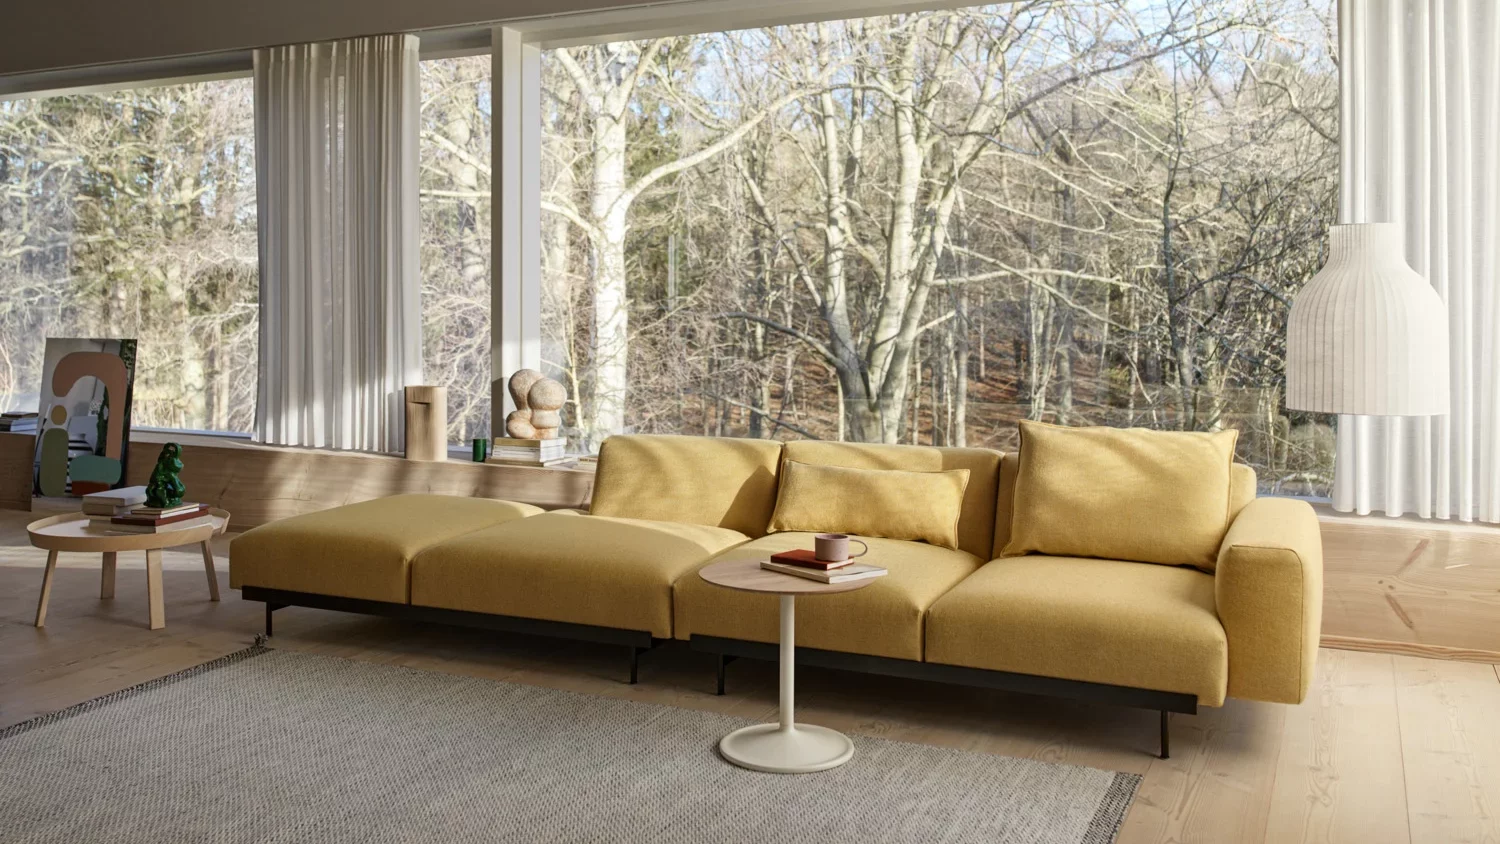 A spacious living room with a mustard-coloured modular couch.